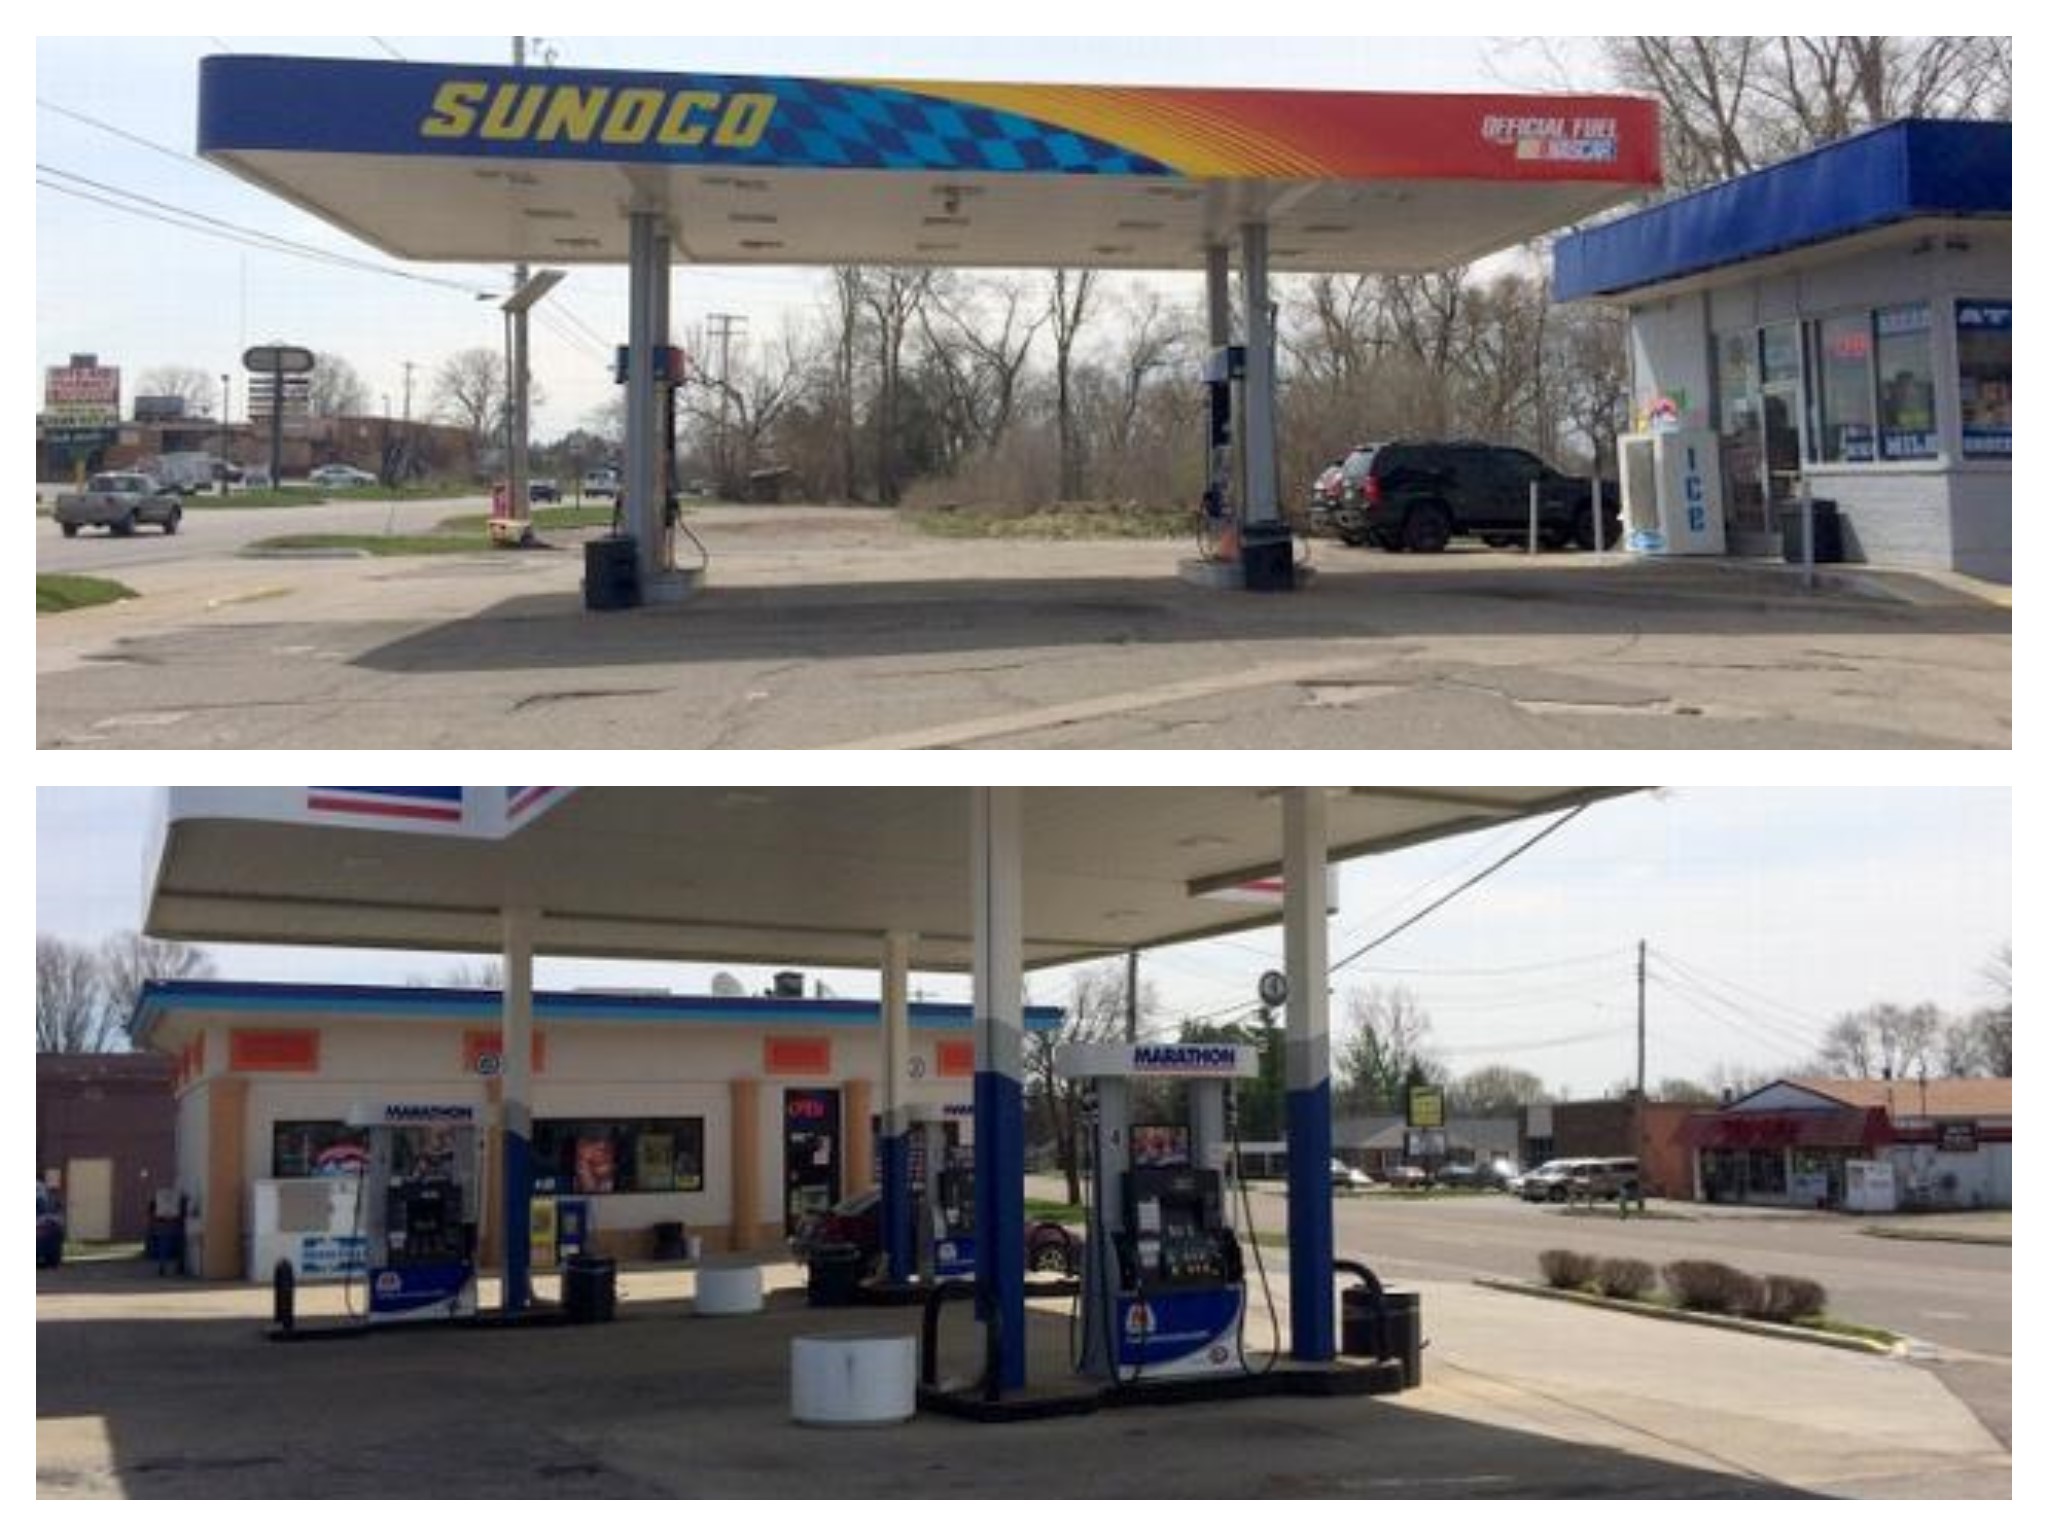 2 Gas Stations Hit the Auction Block June 28